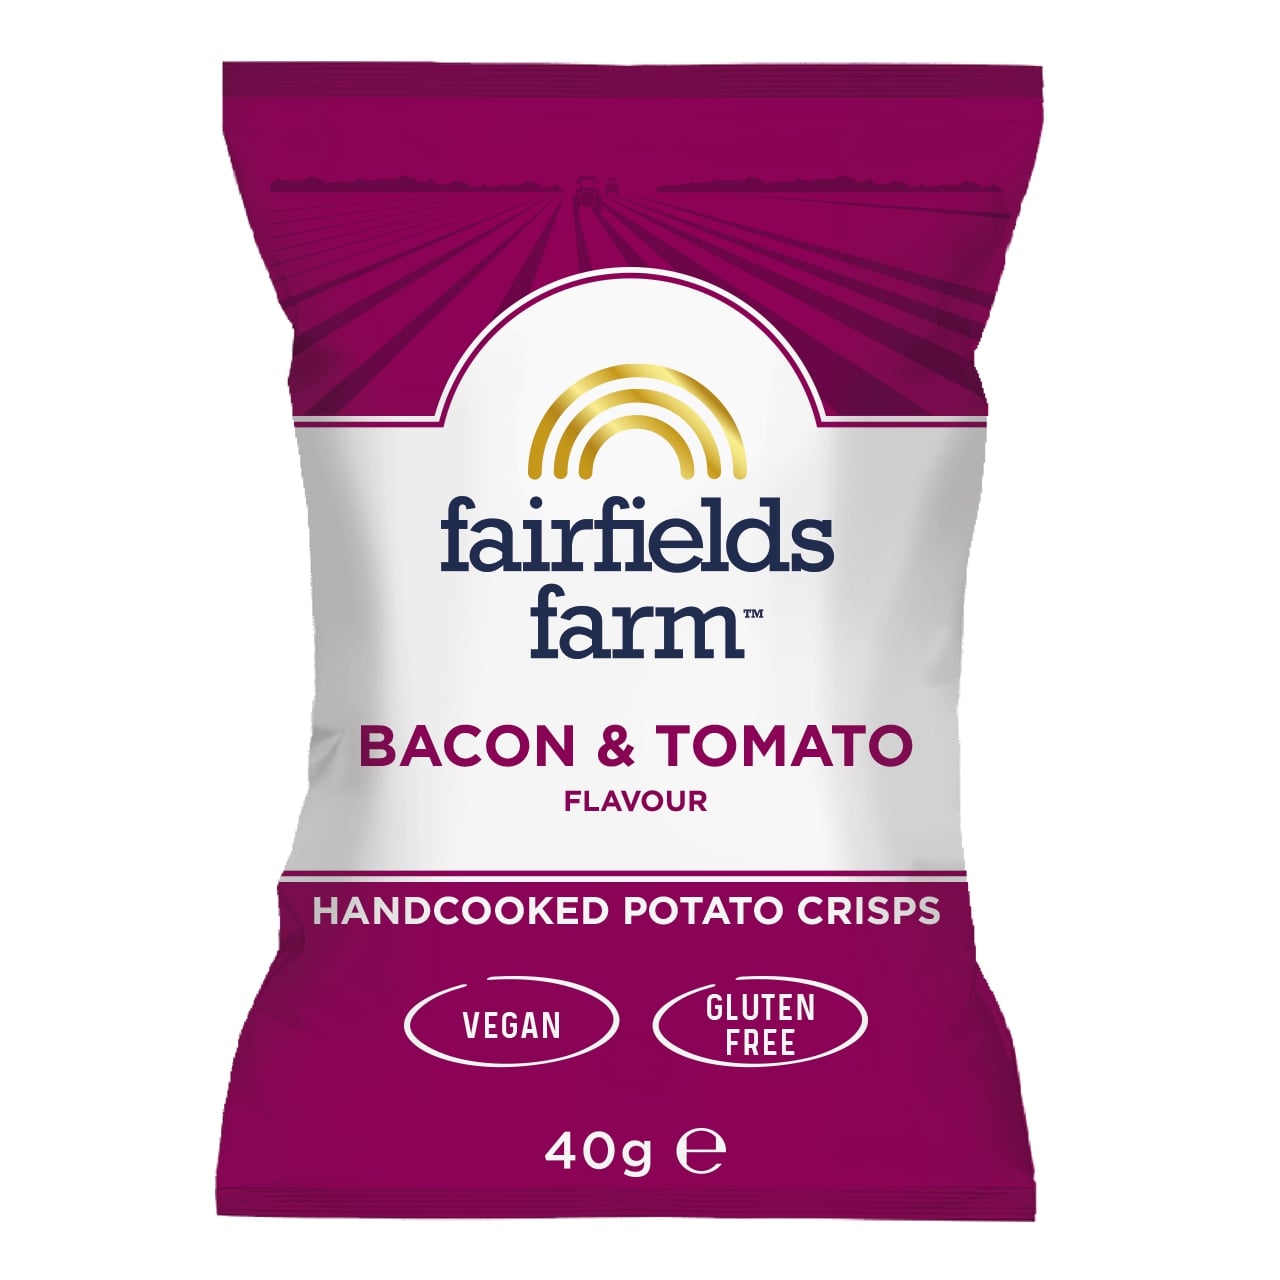 Protected: Bacon & Tomato Flavour 40g